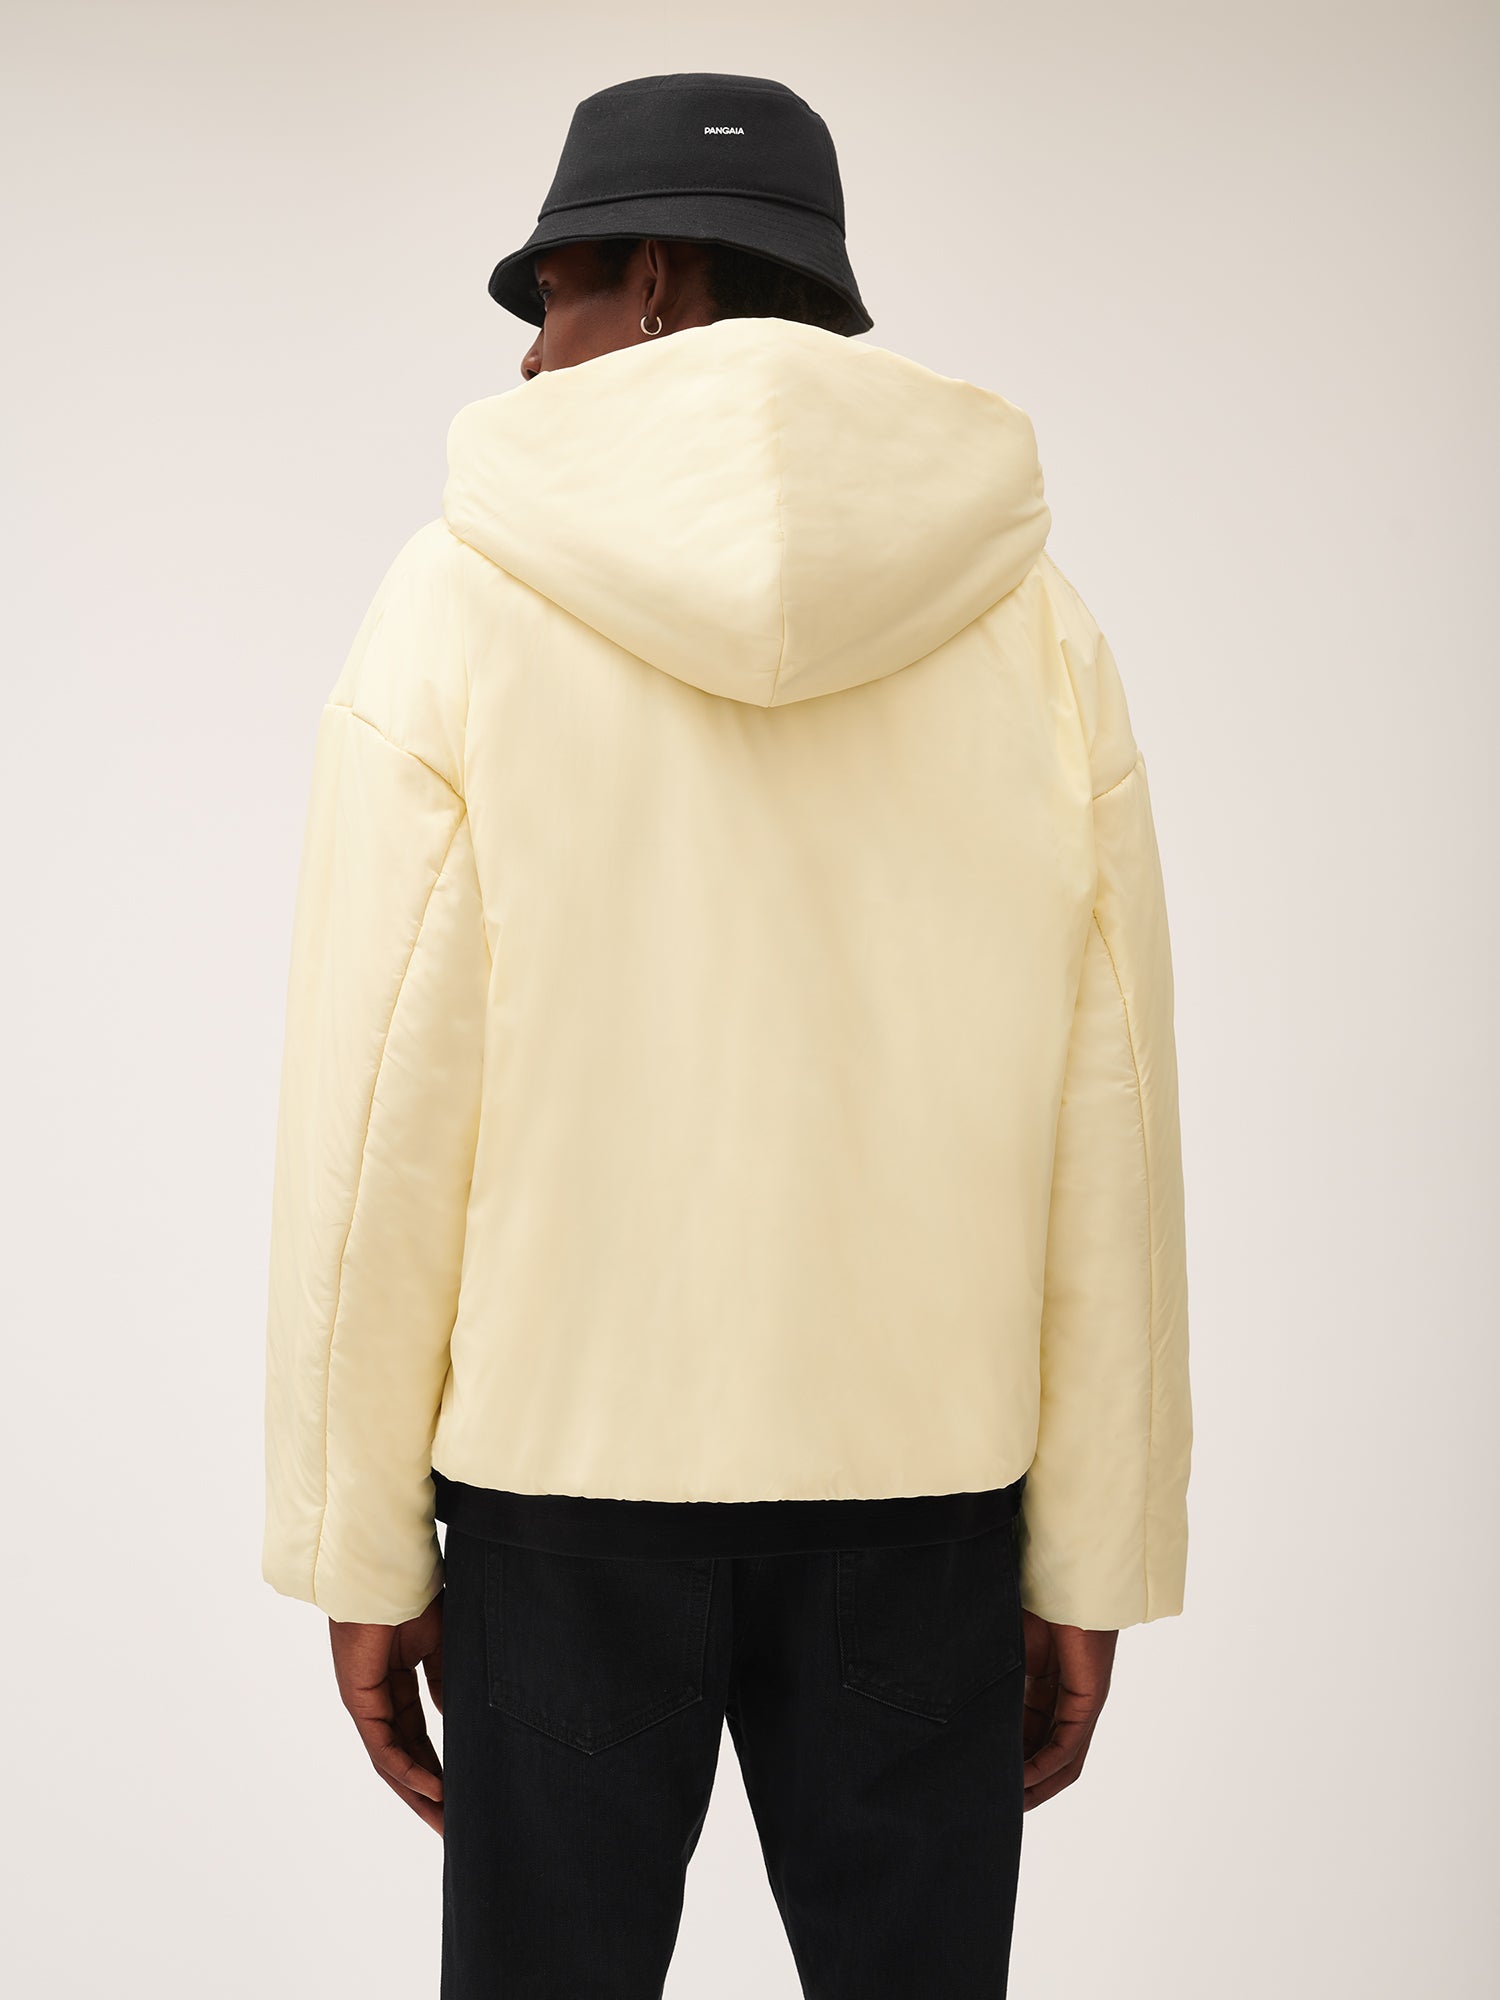 FLWRFLL_Unisex_Hoodie_Rind_Yellow-male-3